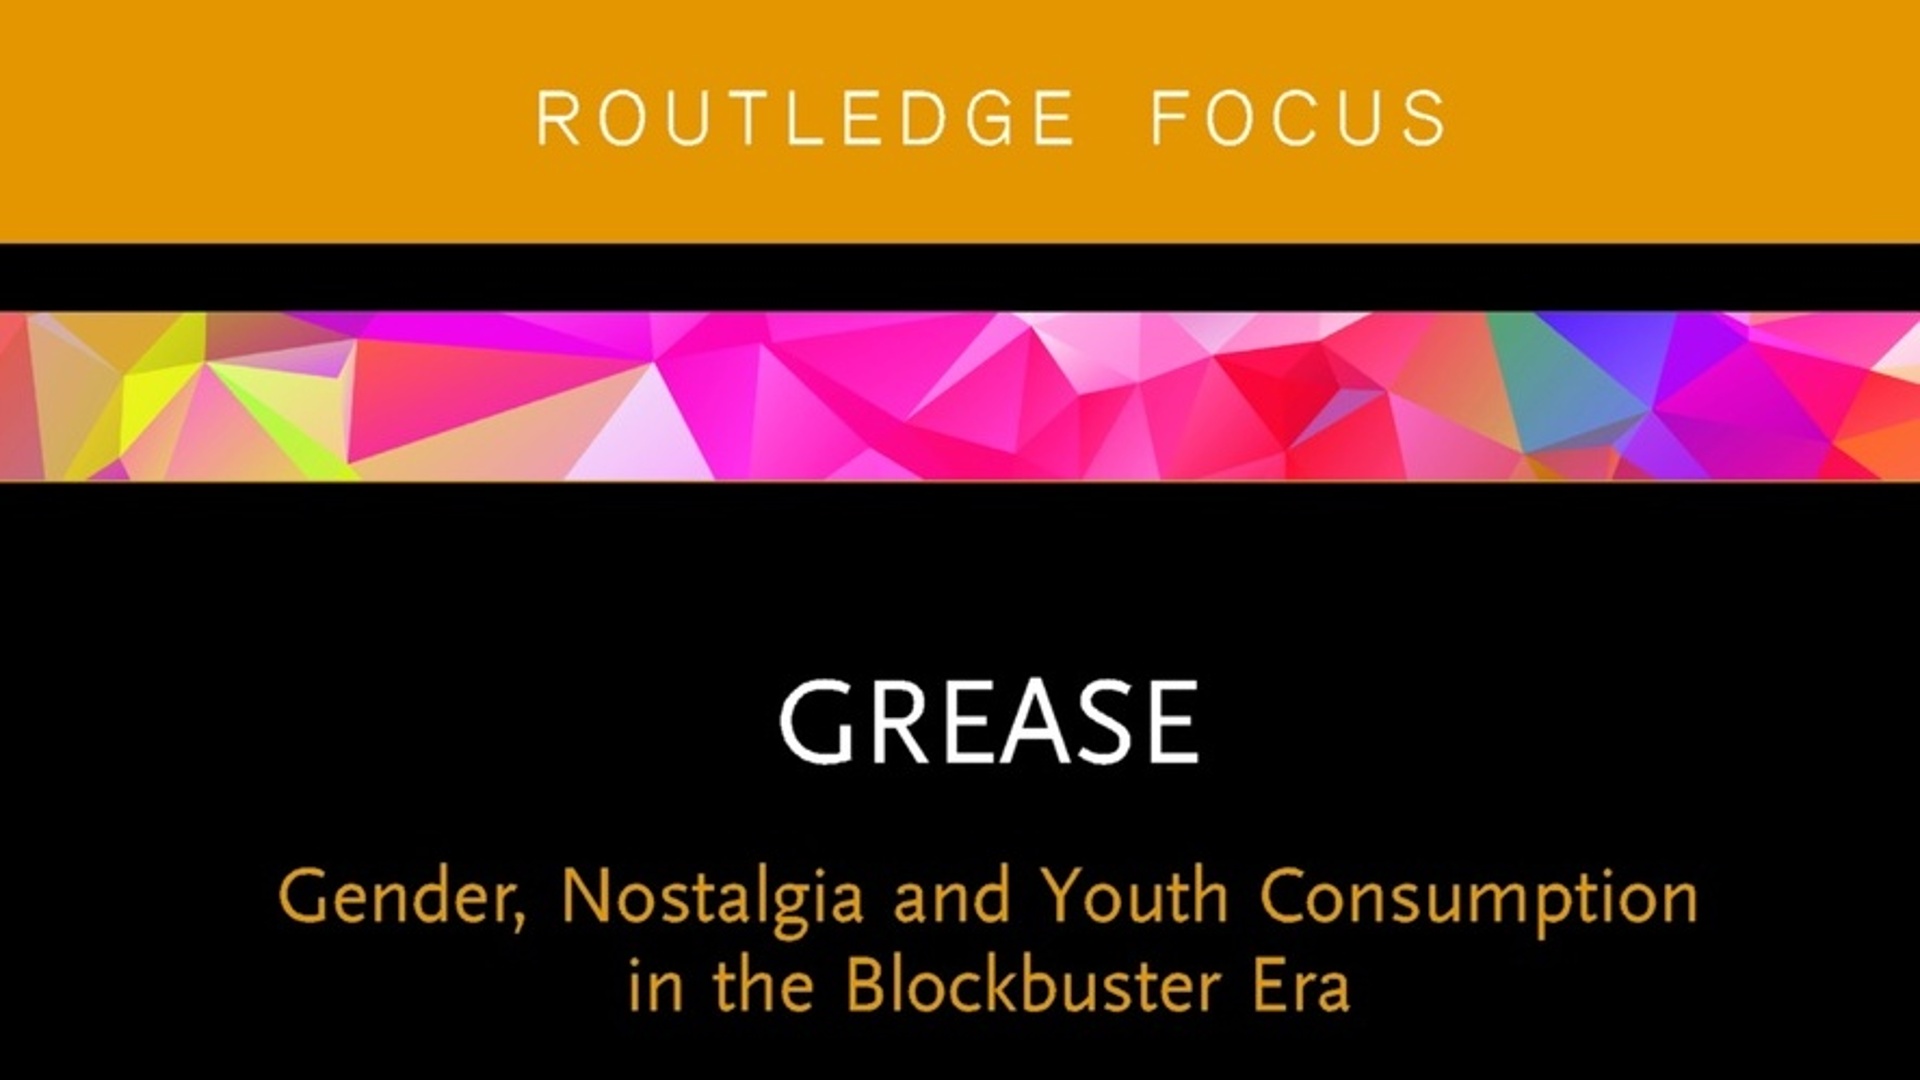 Grease: Gender, Nostalgia and Youth Consumption in the Blockbuster Era